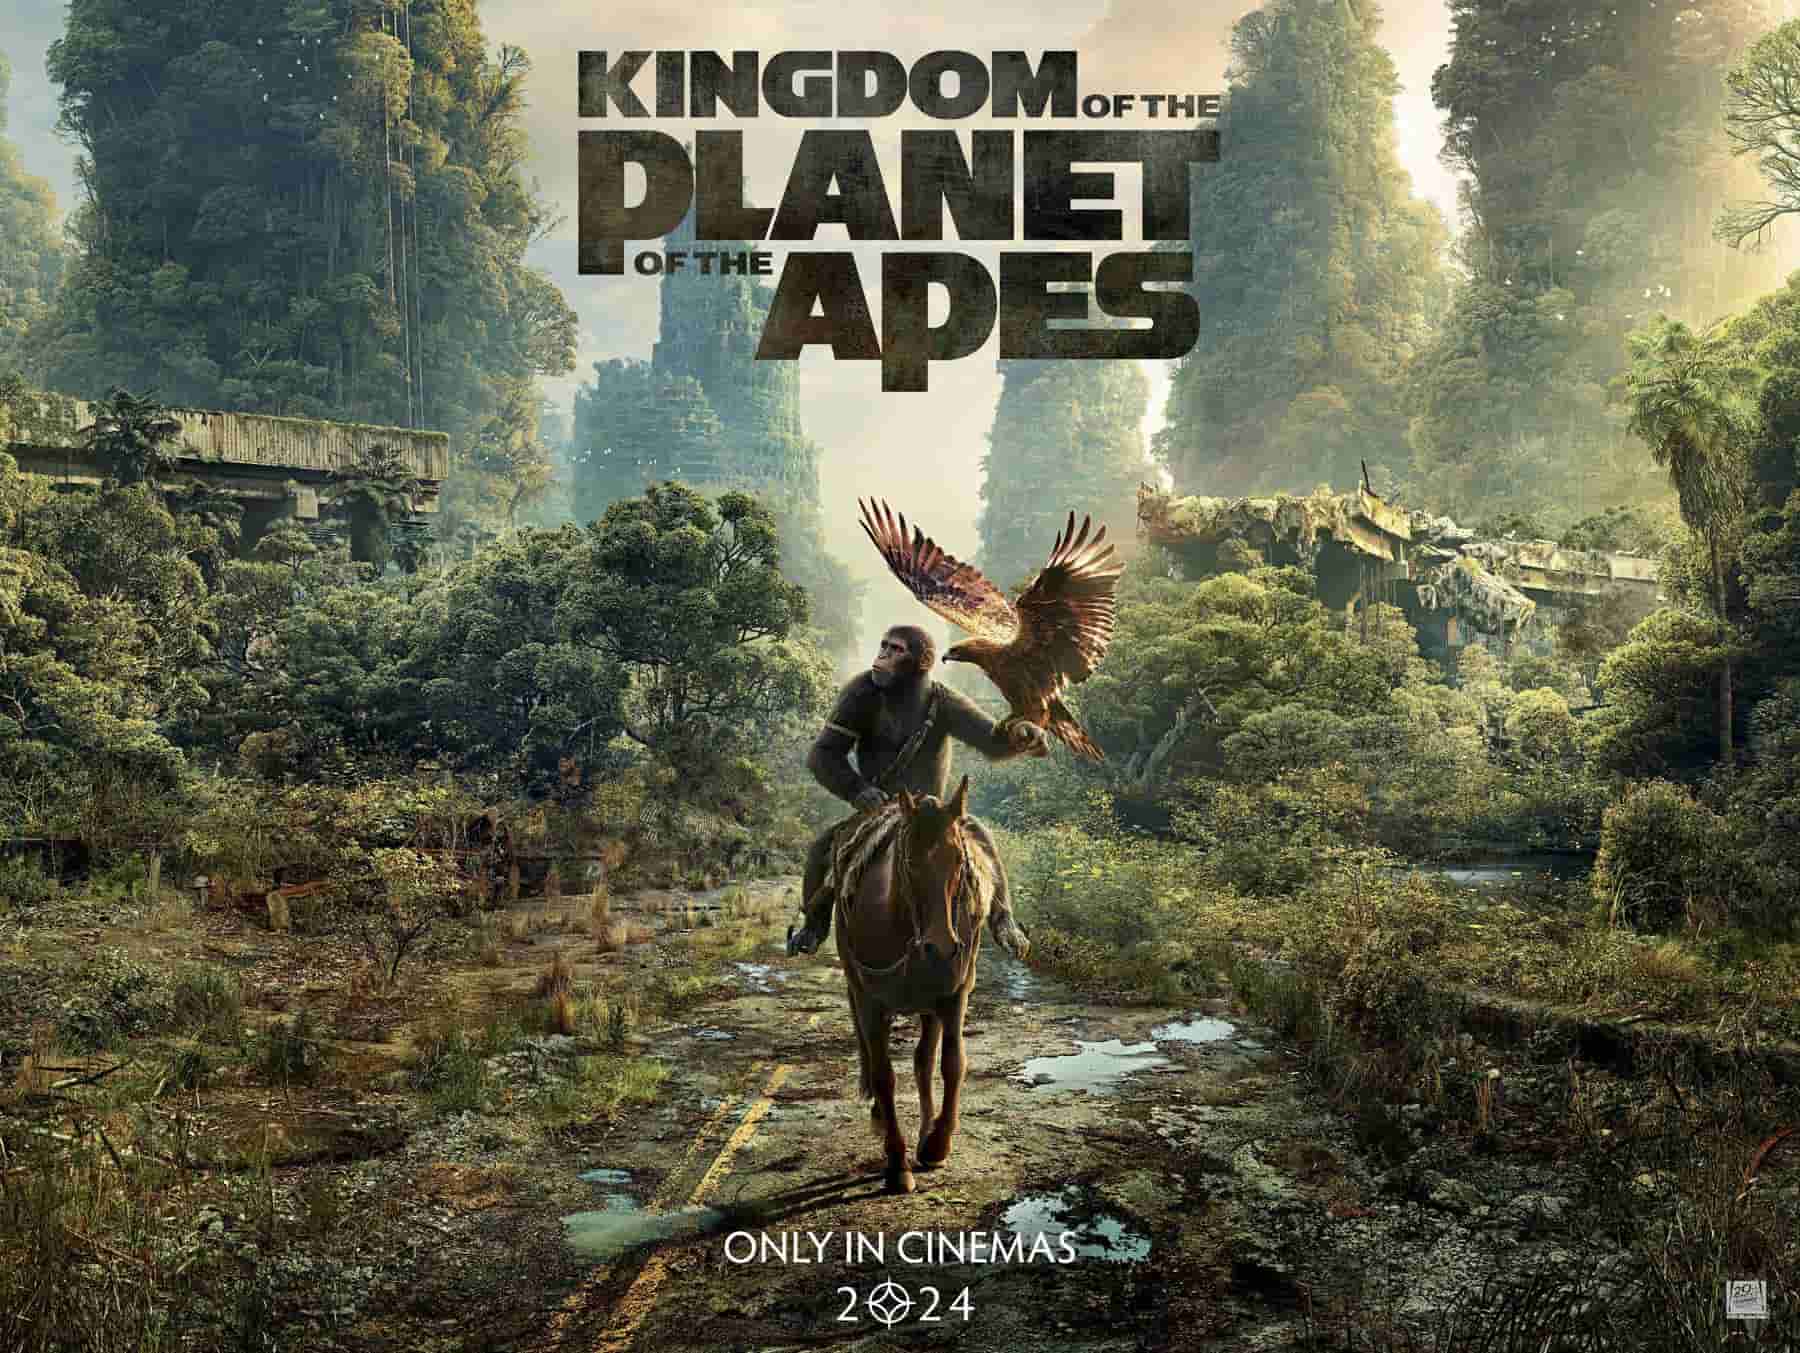 The Kingdom of the planet of the apes - Red Carpet London Premiere with Crofton and Park Concierge Service